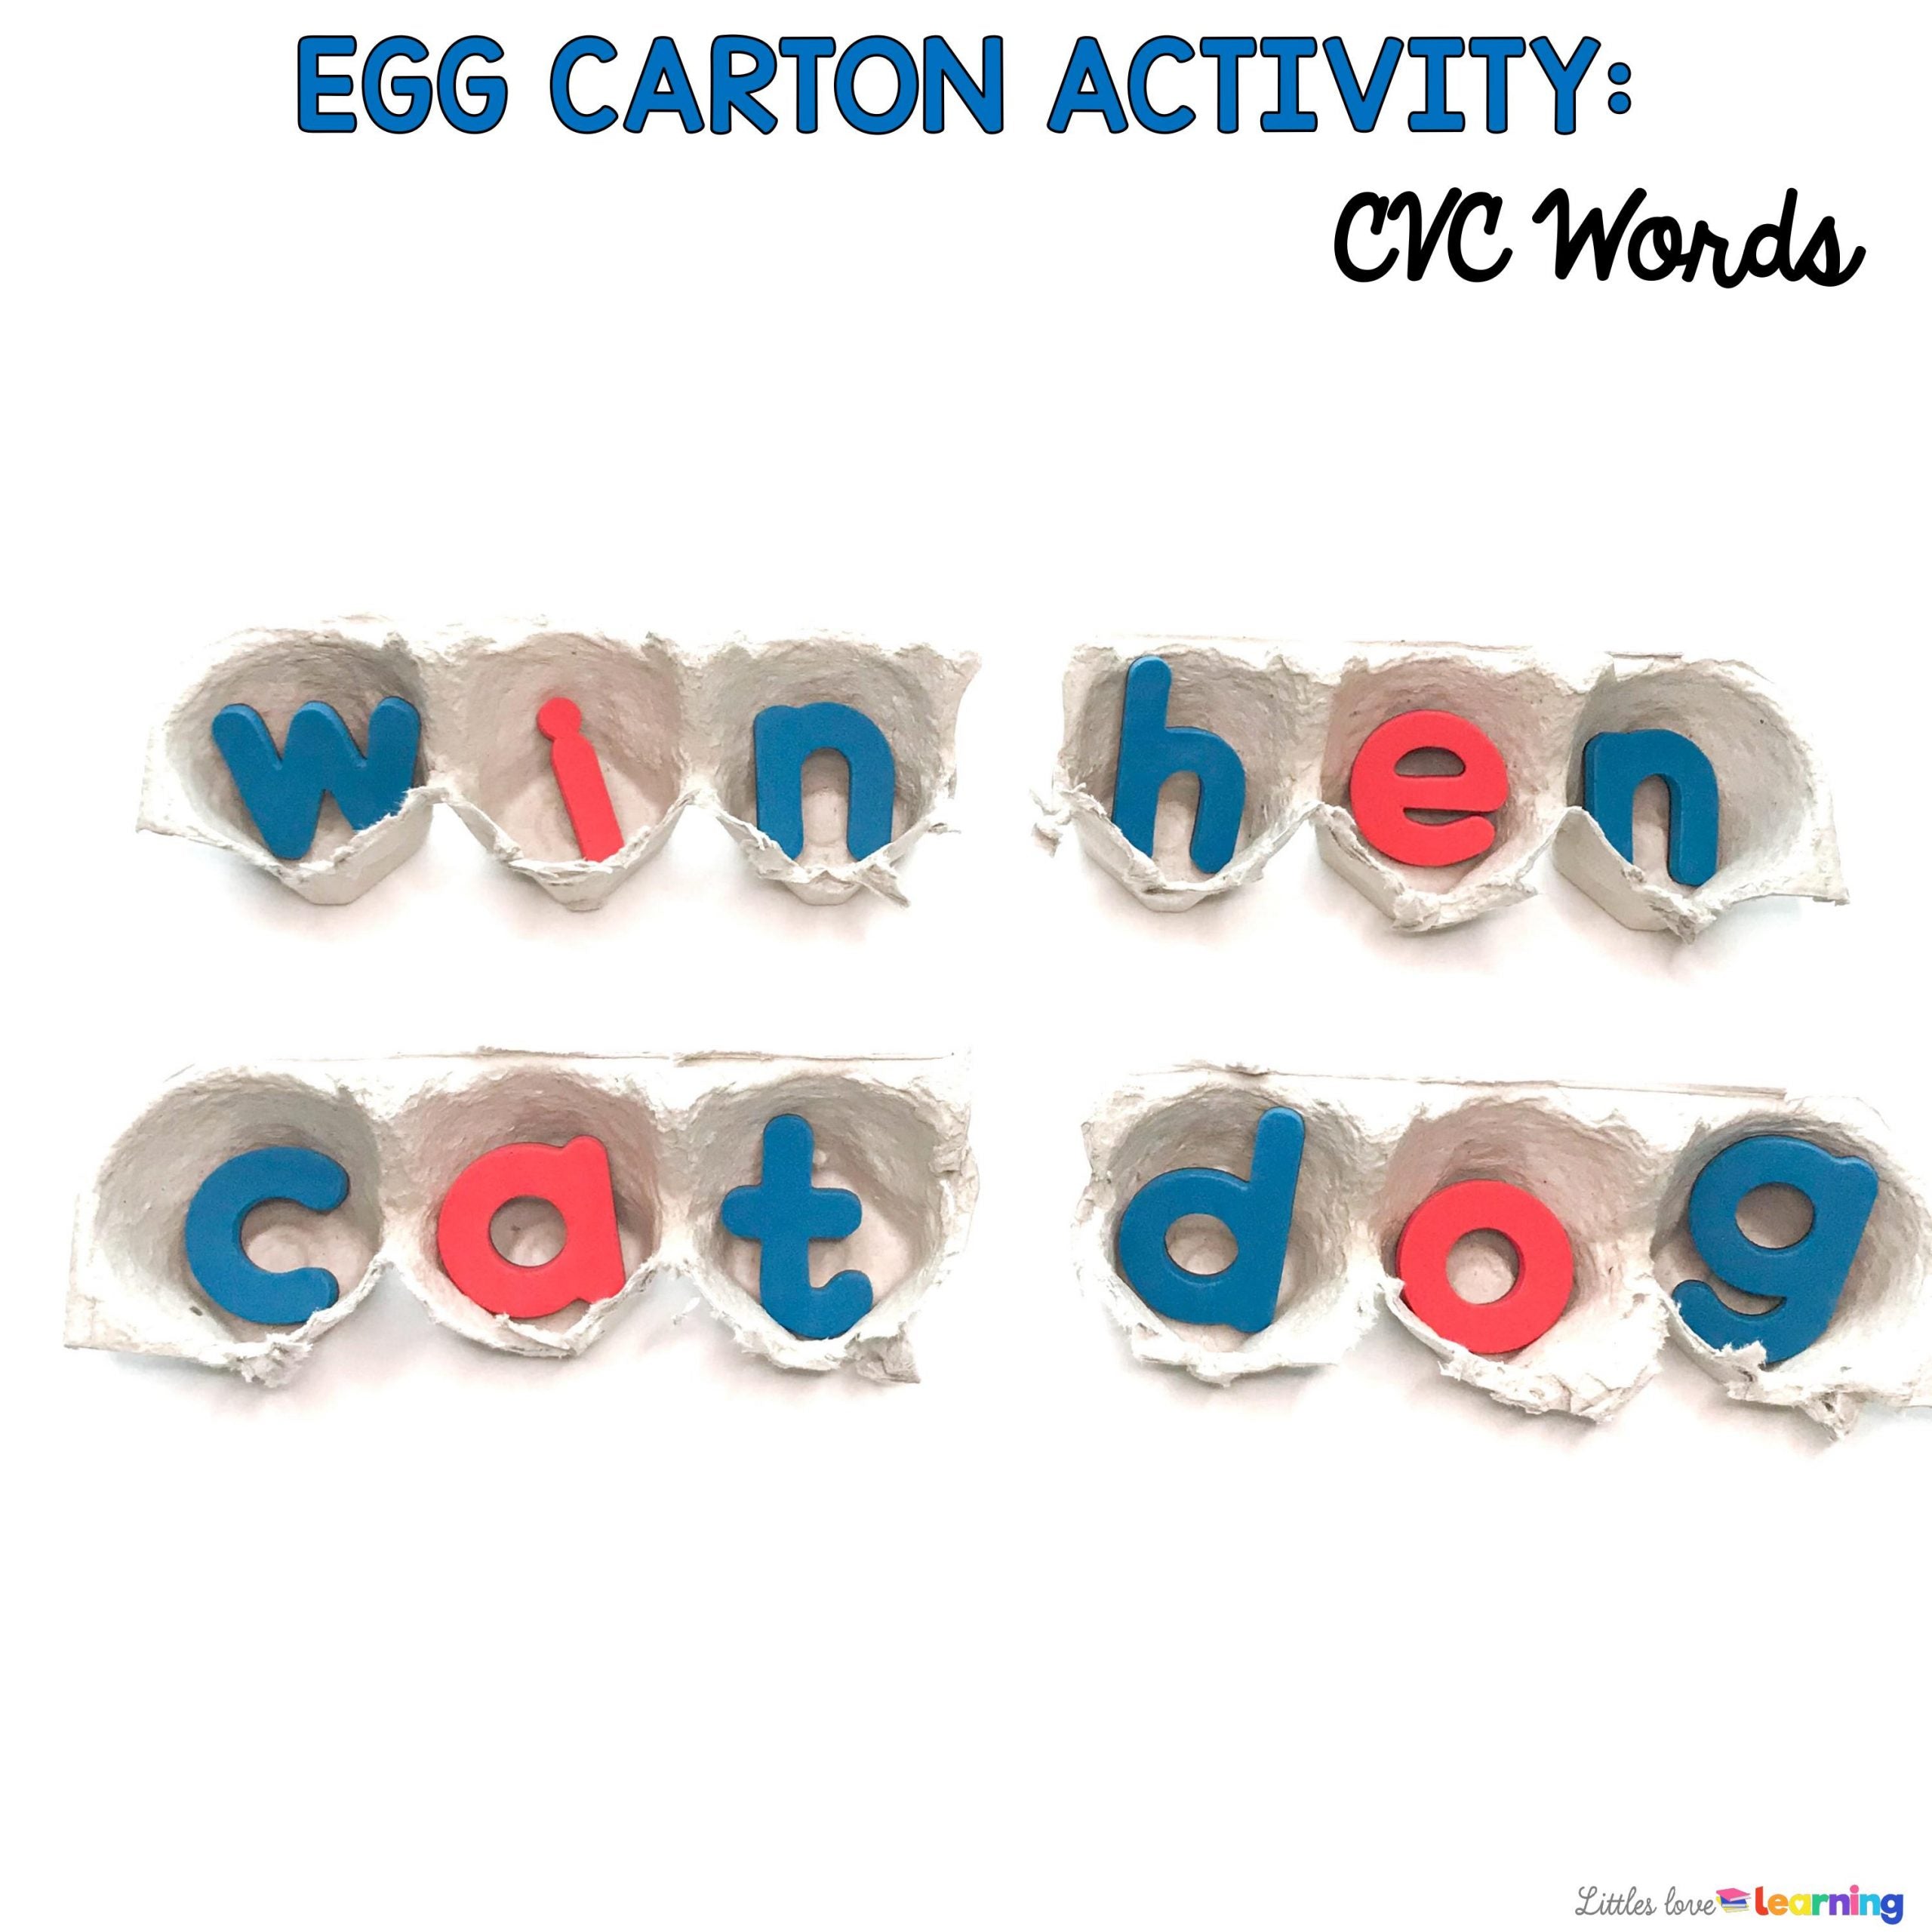 egg carton activity for kindergartners cvc word in egg cartons with one letter per space